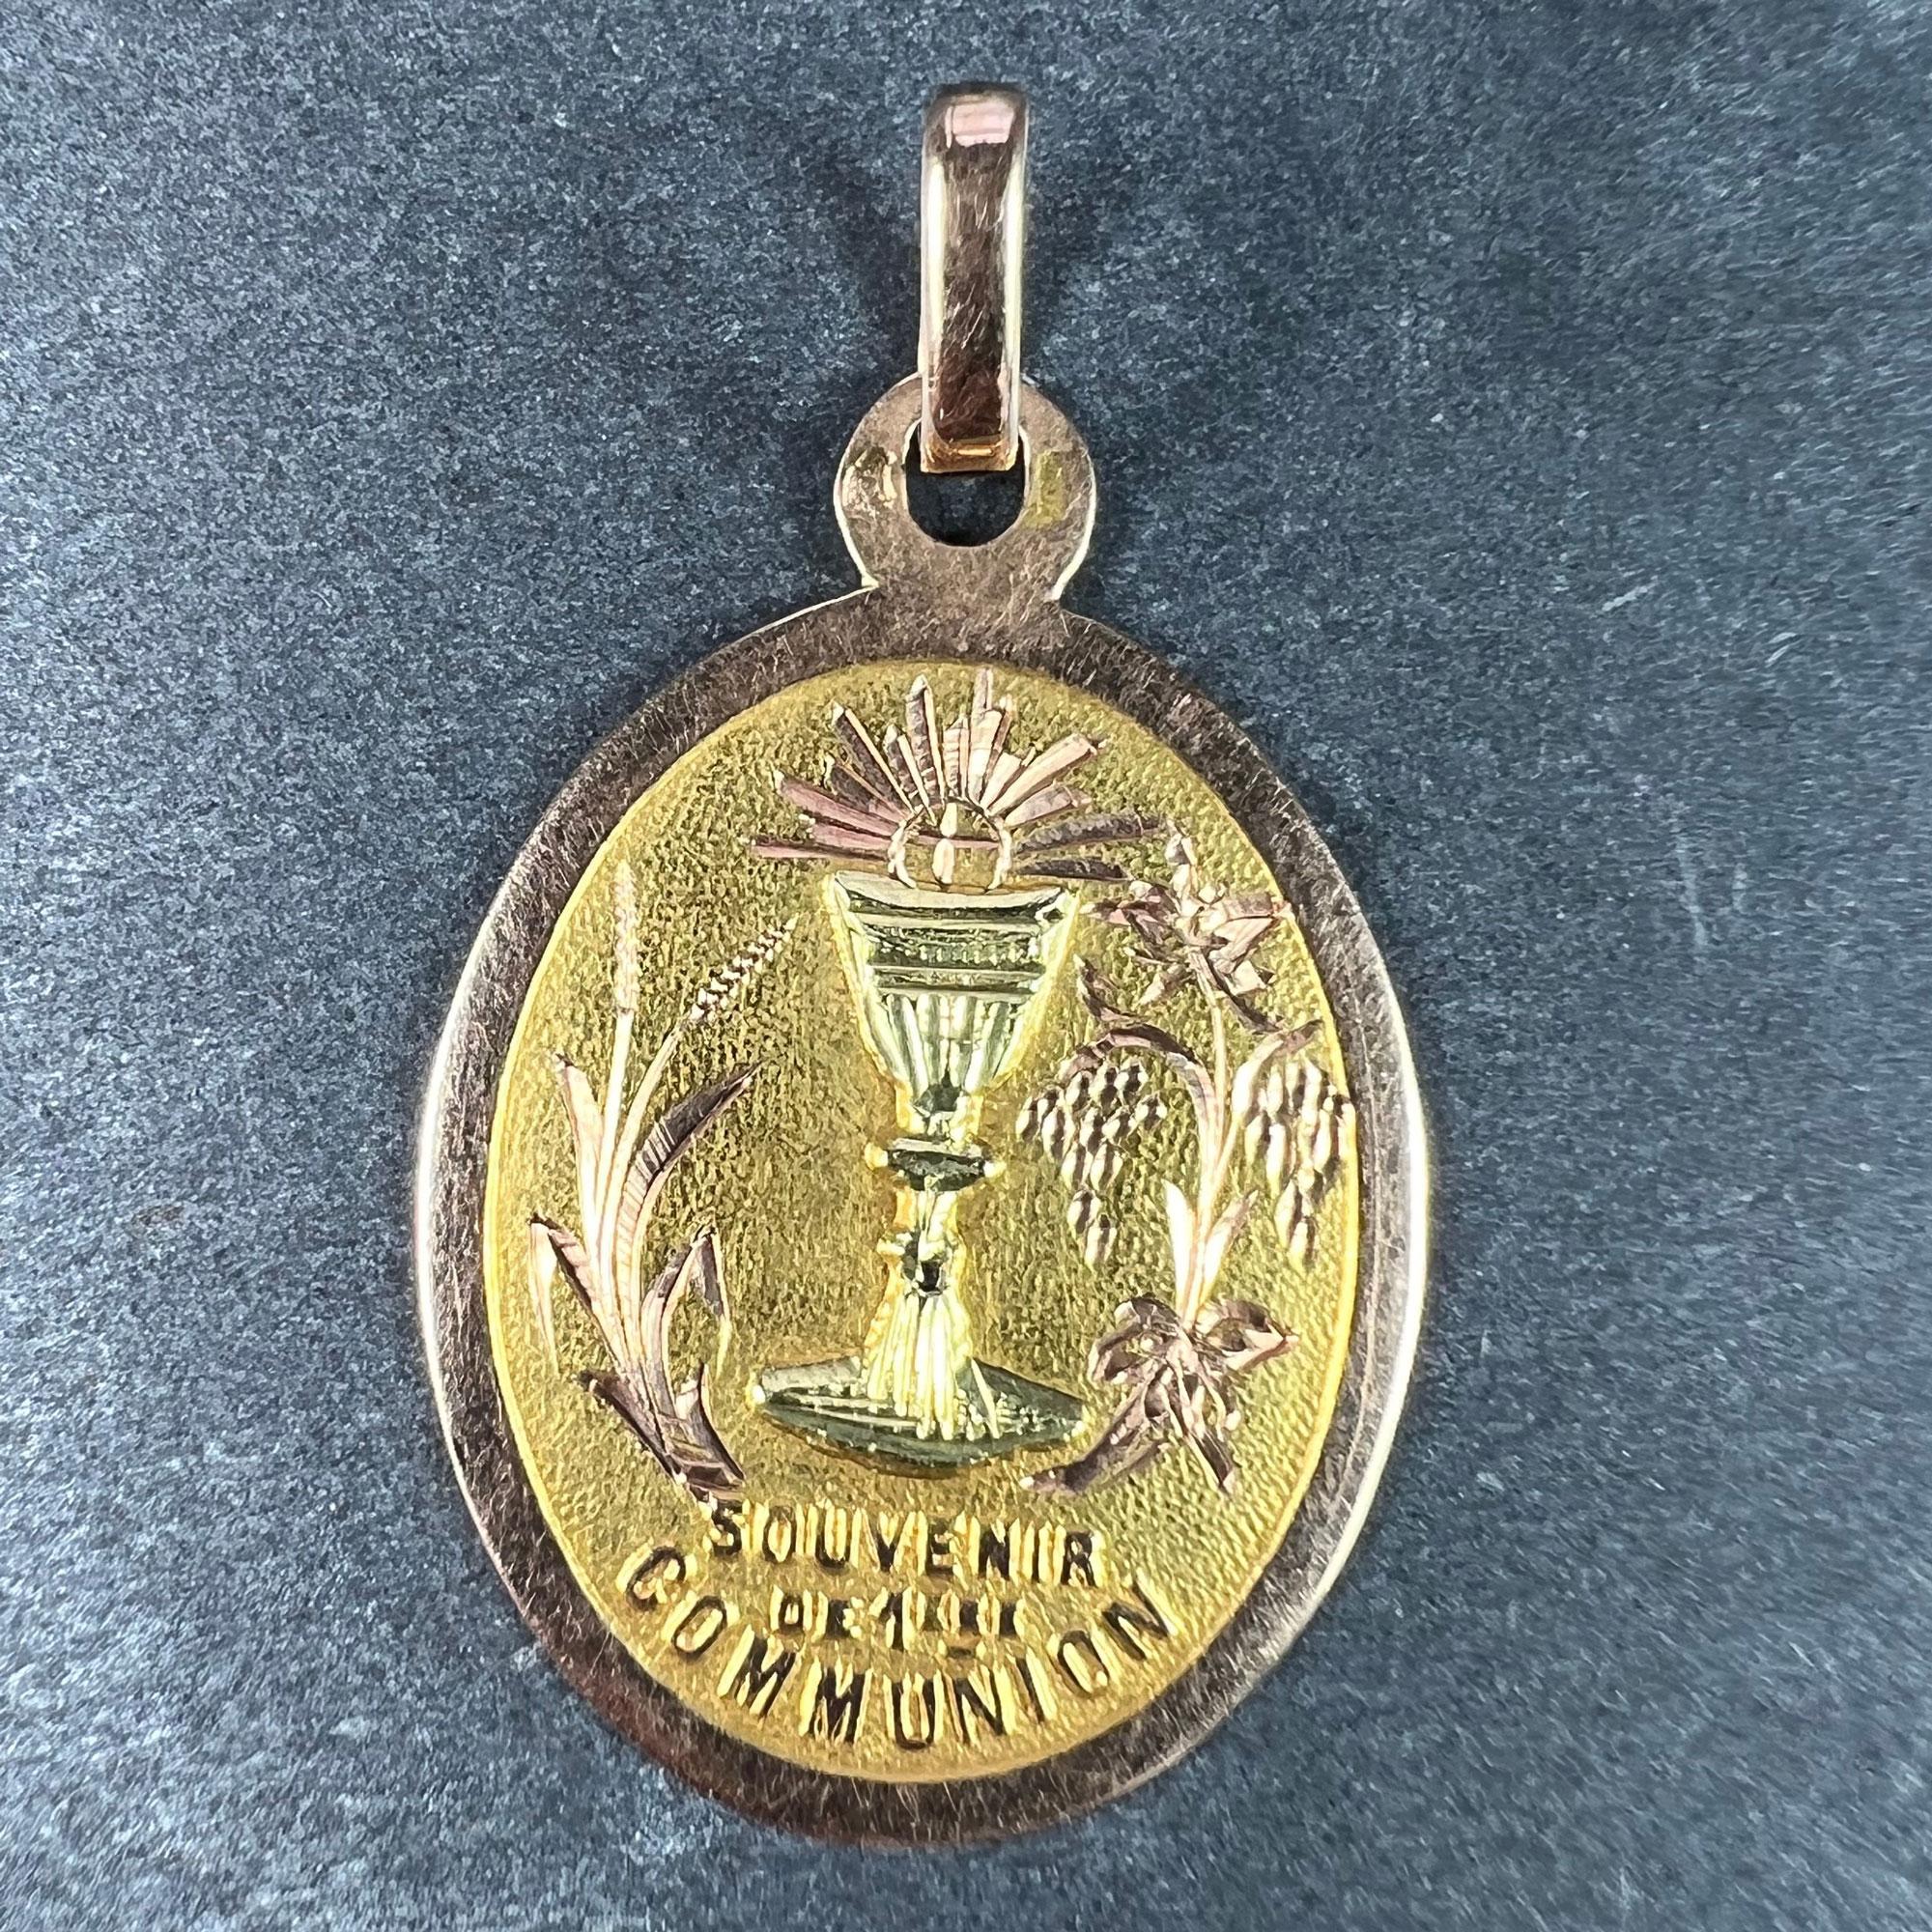 A French 18 karat (18K) rose and yellow gold charm pendant depicting a chalice surmounted with a wafer, flanked by a grapevine and a sheaf of wheat, representing the First Communion. In raised text below 'Souvenir de 1ere Communion'. Engraved to the